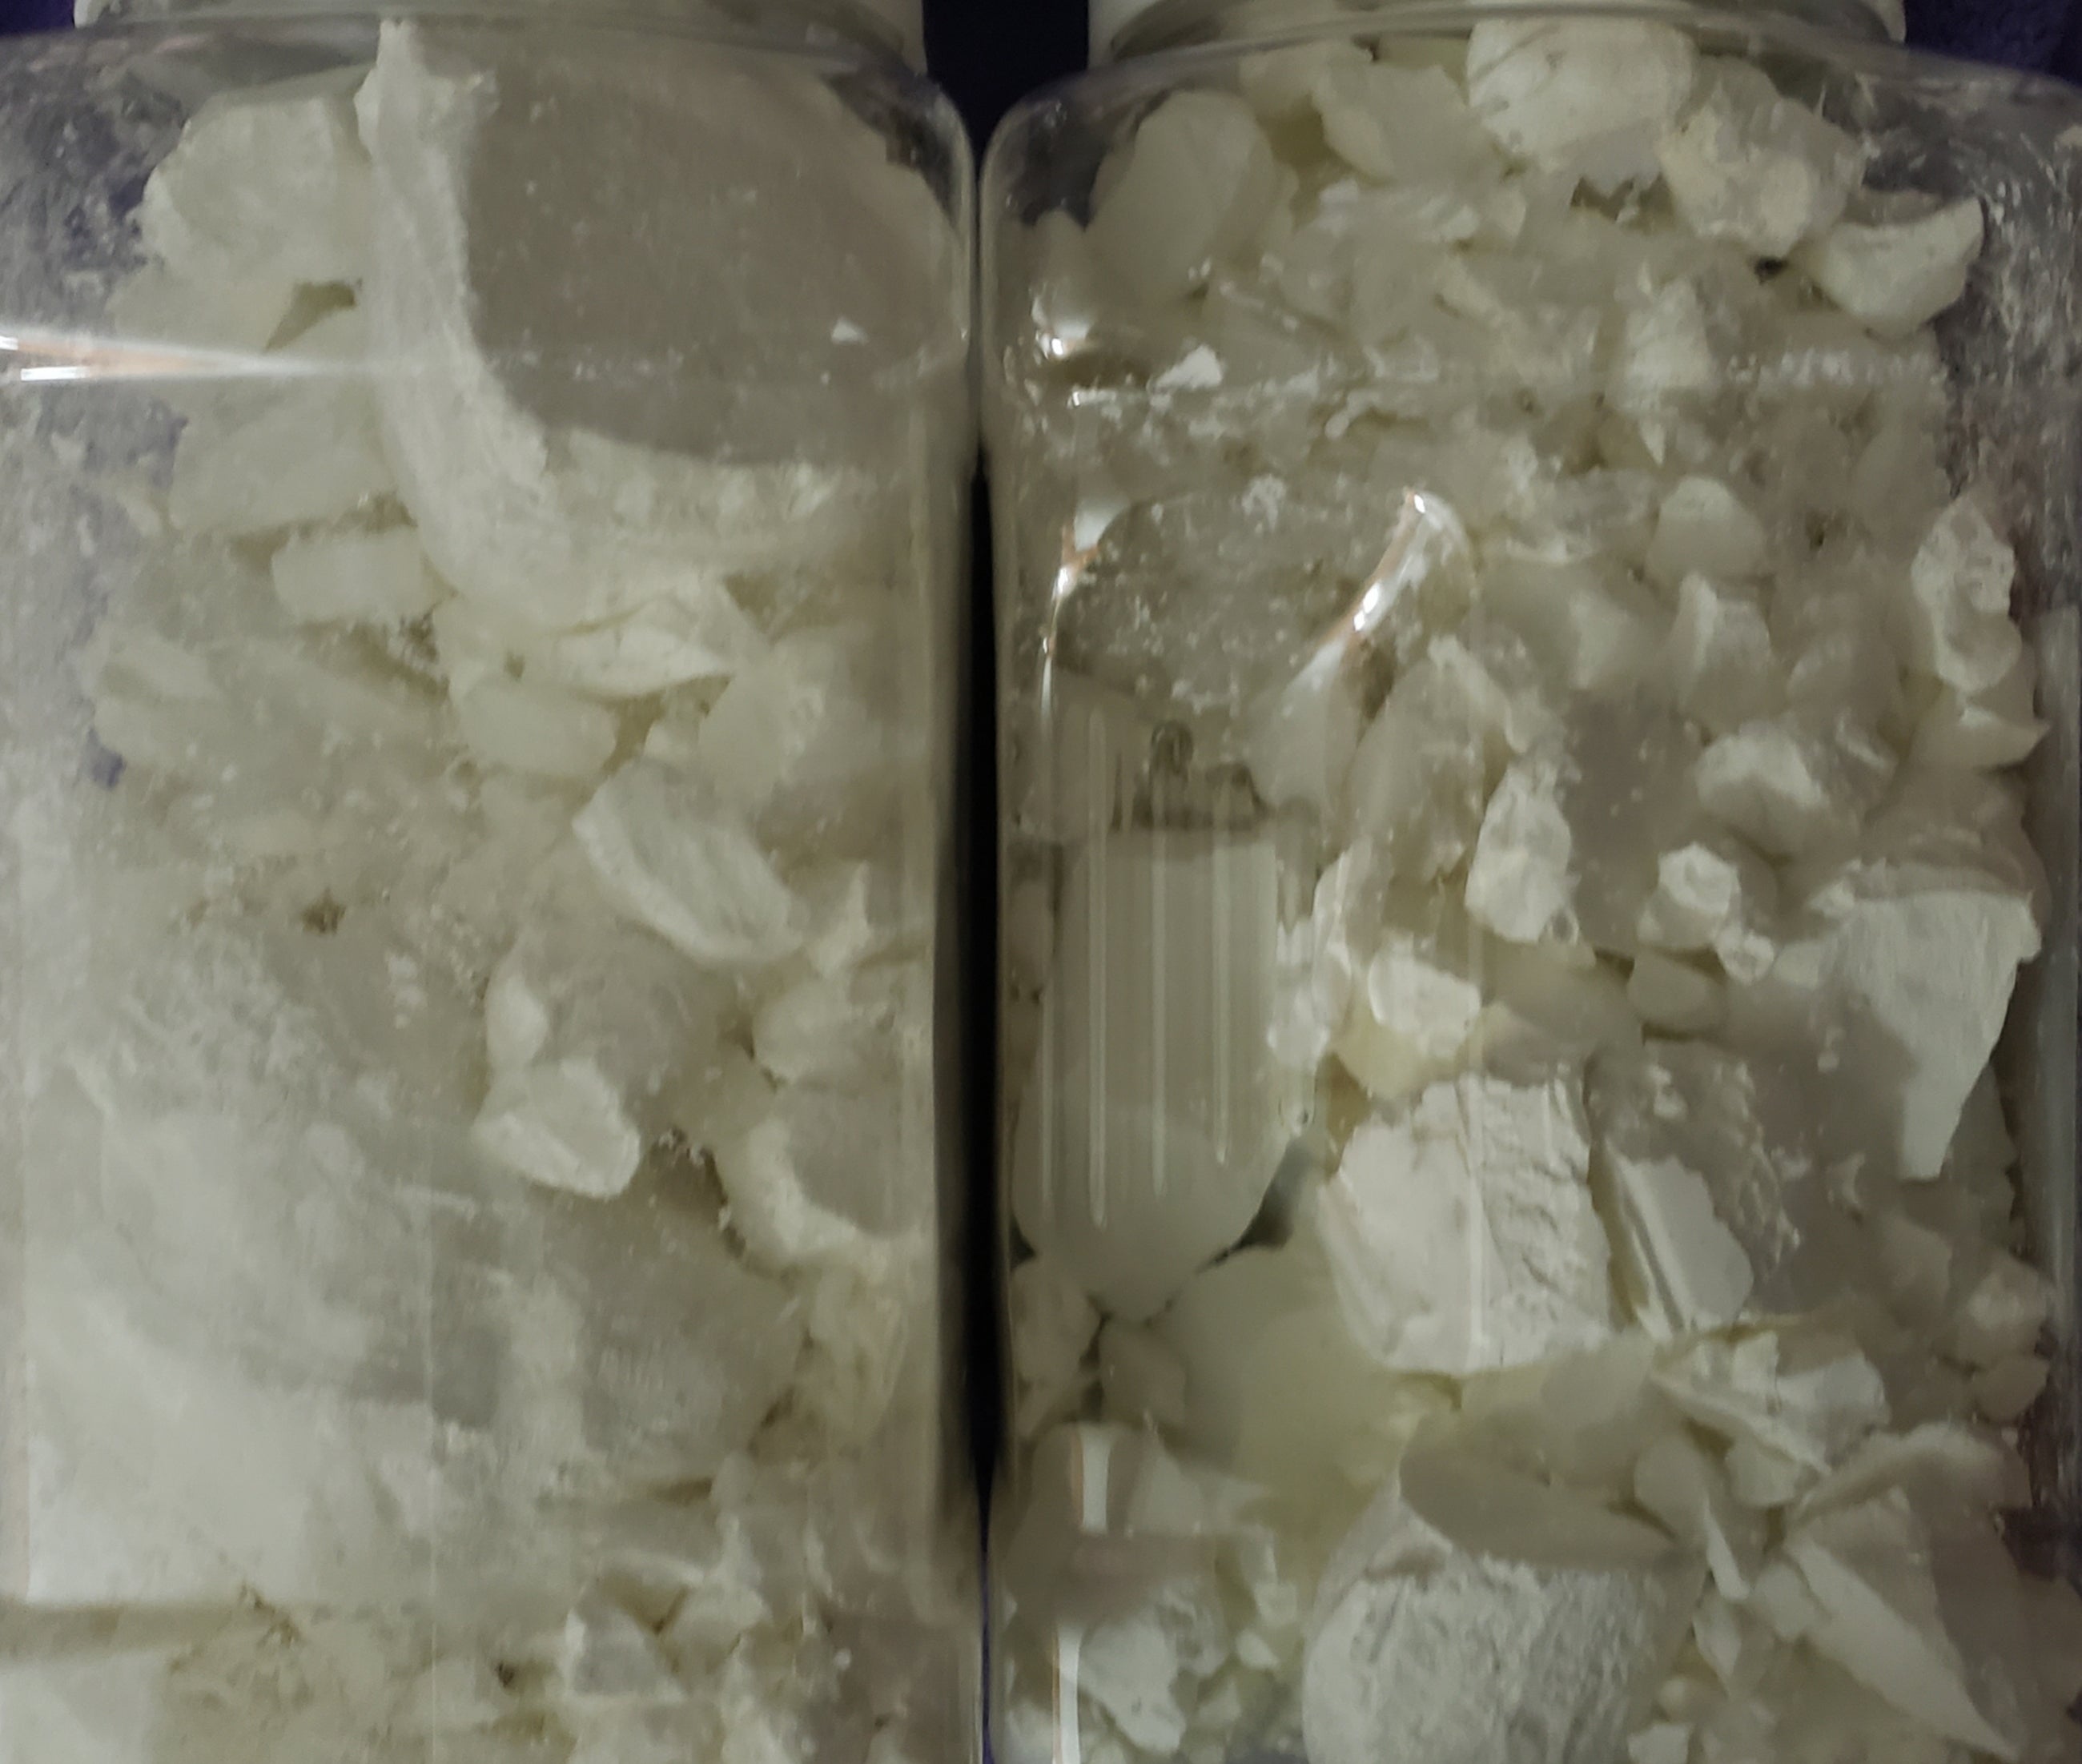 Cornstarch Chunks for Sale in Fayetteville, NC - OfferUp